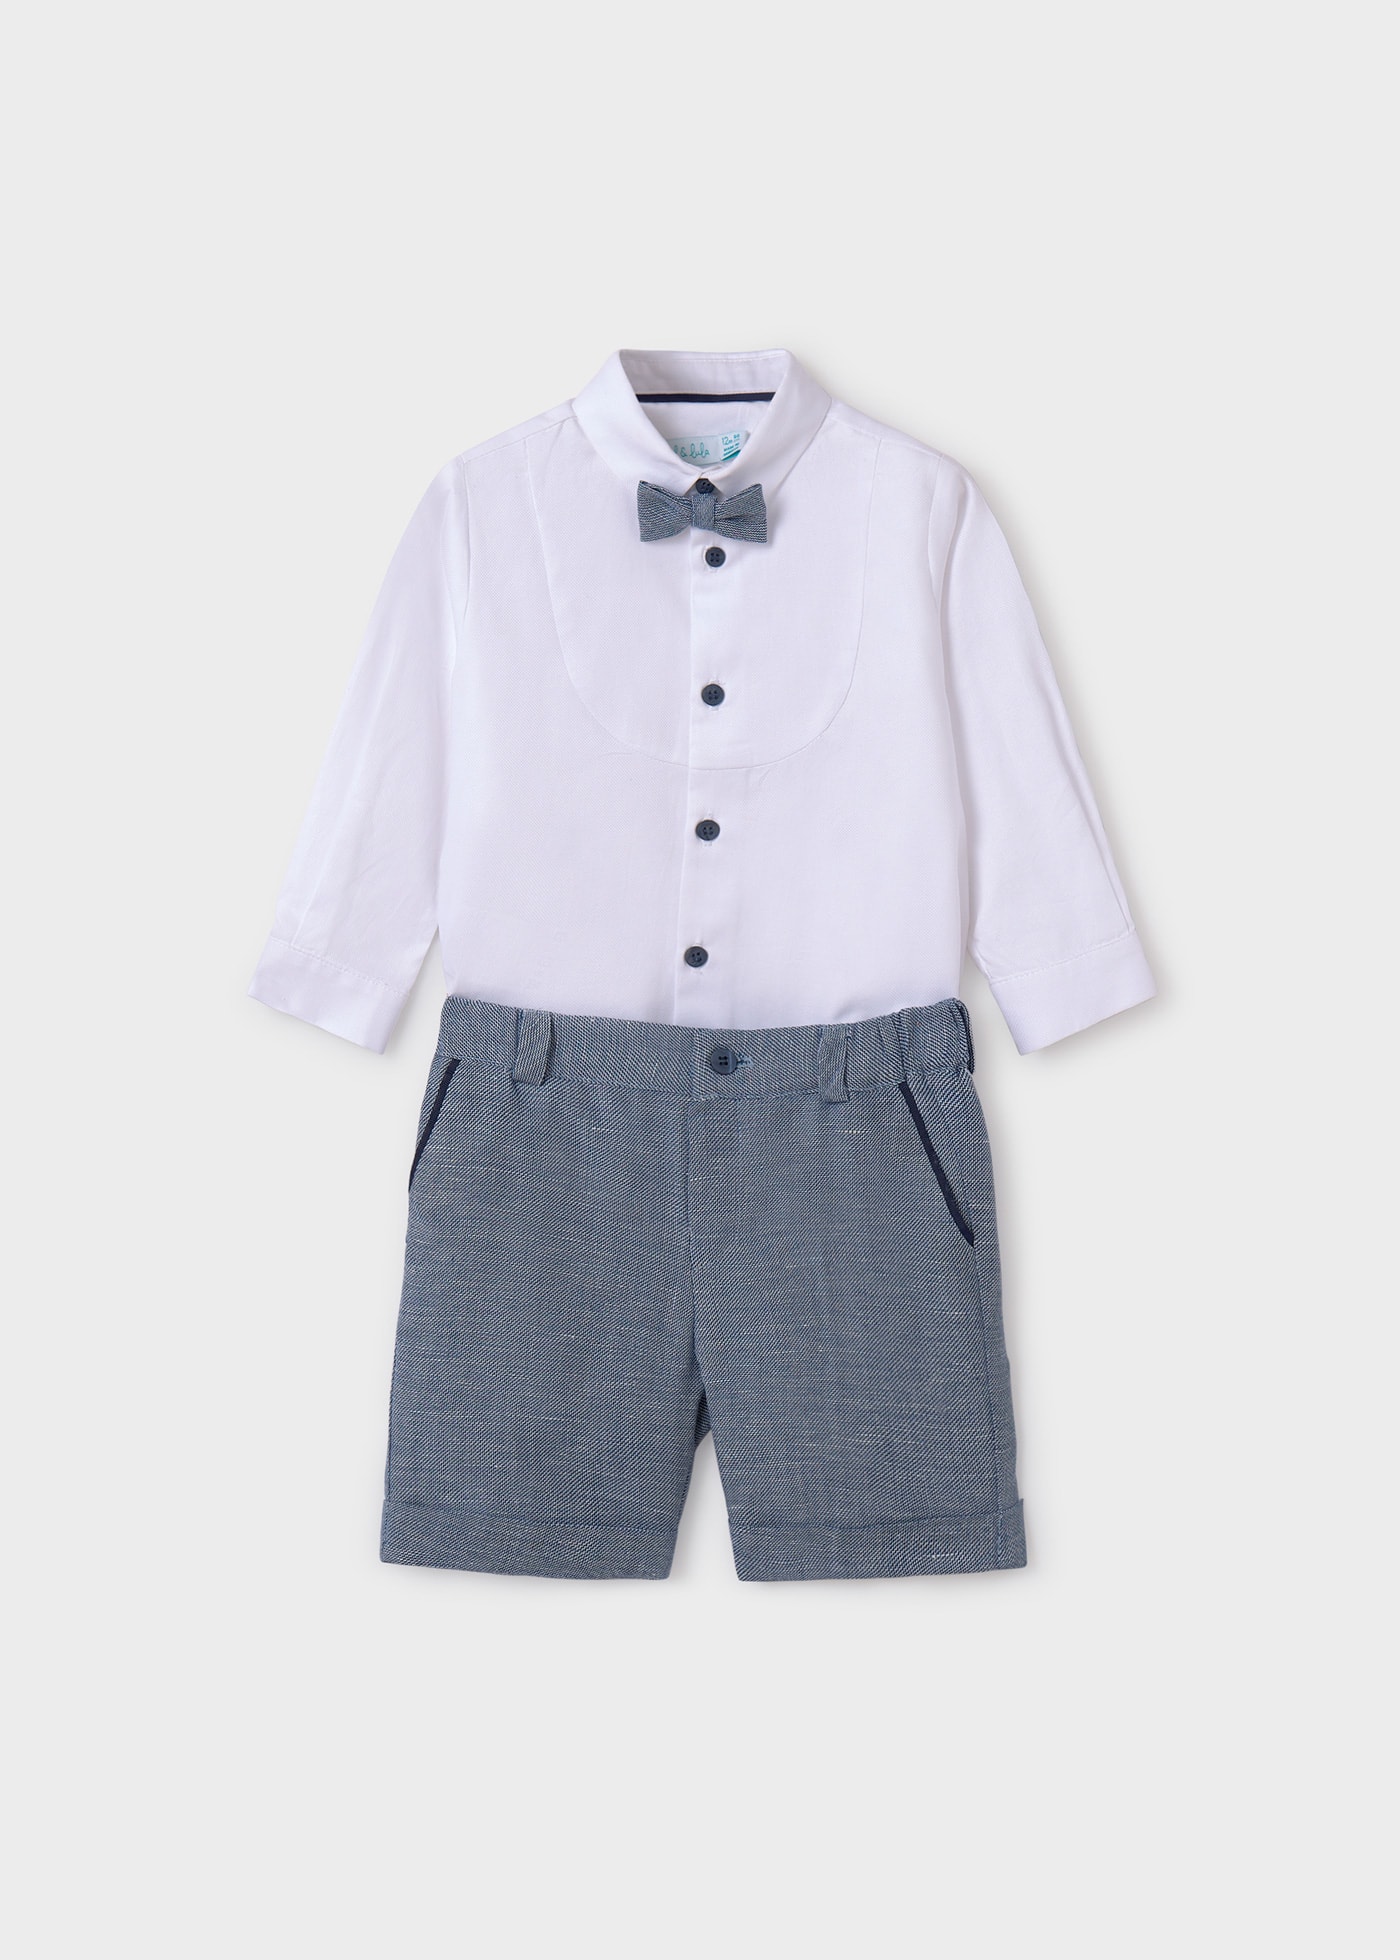 Boy Shorts and Shirt with Bow Tie Set